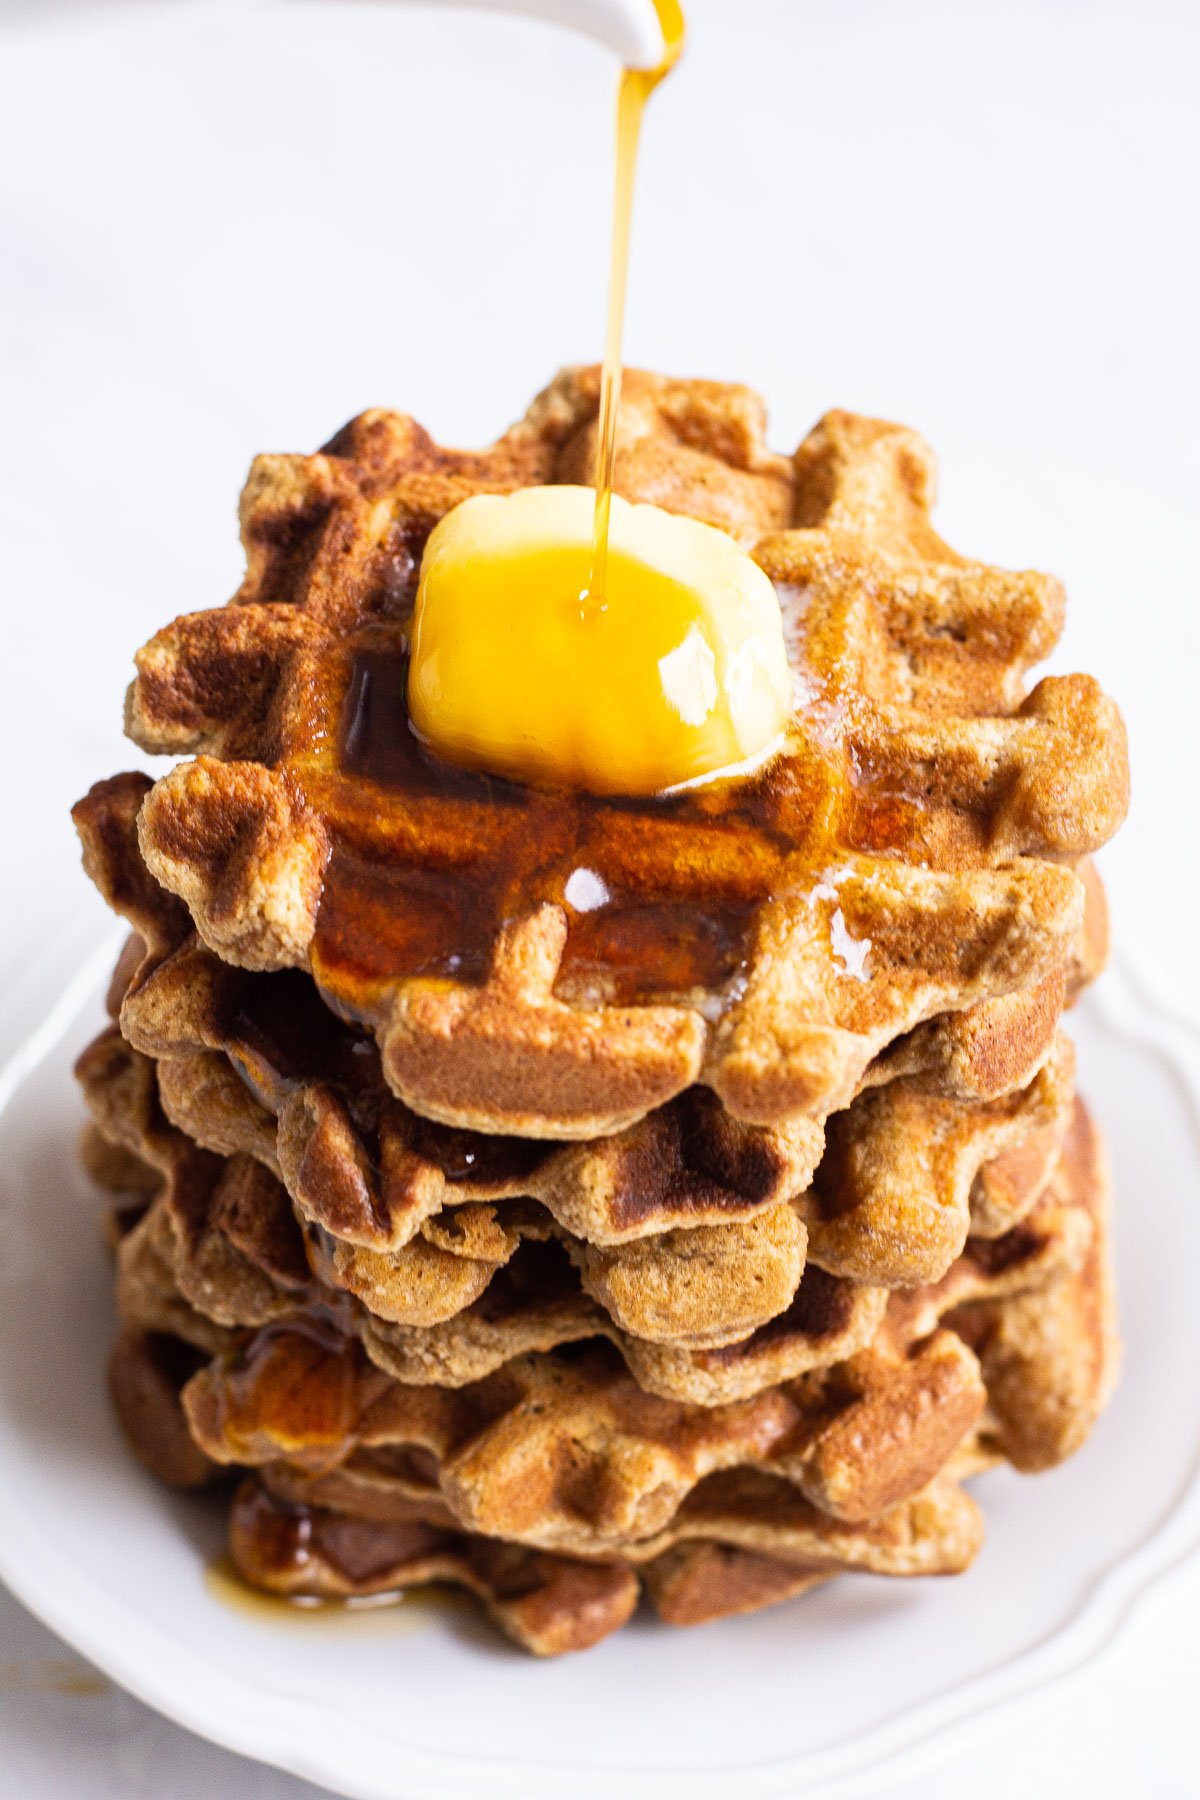 Almond flour waffles with syrup being drizzled on from above.